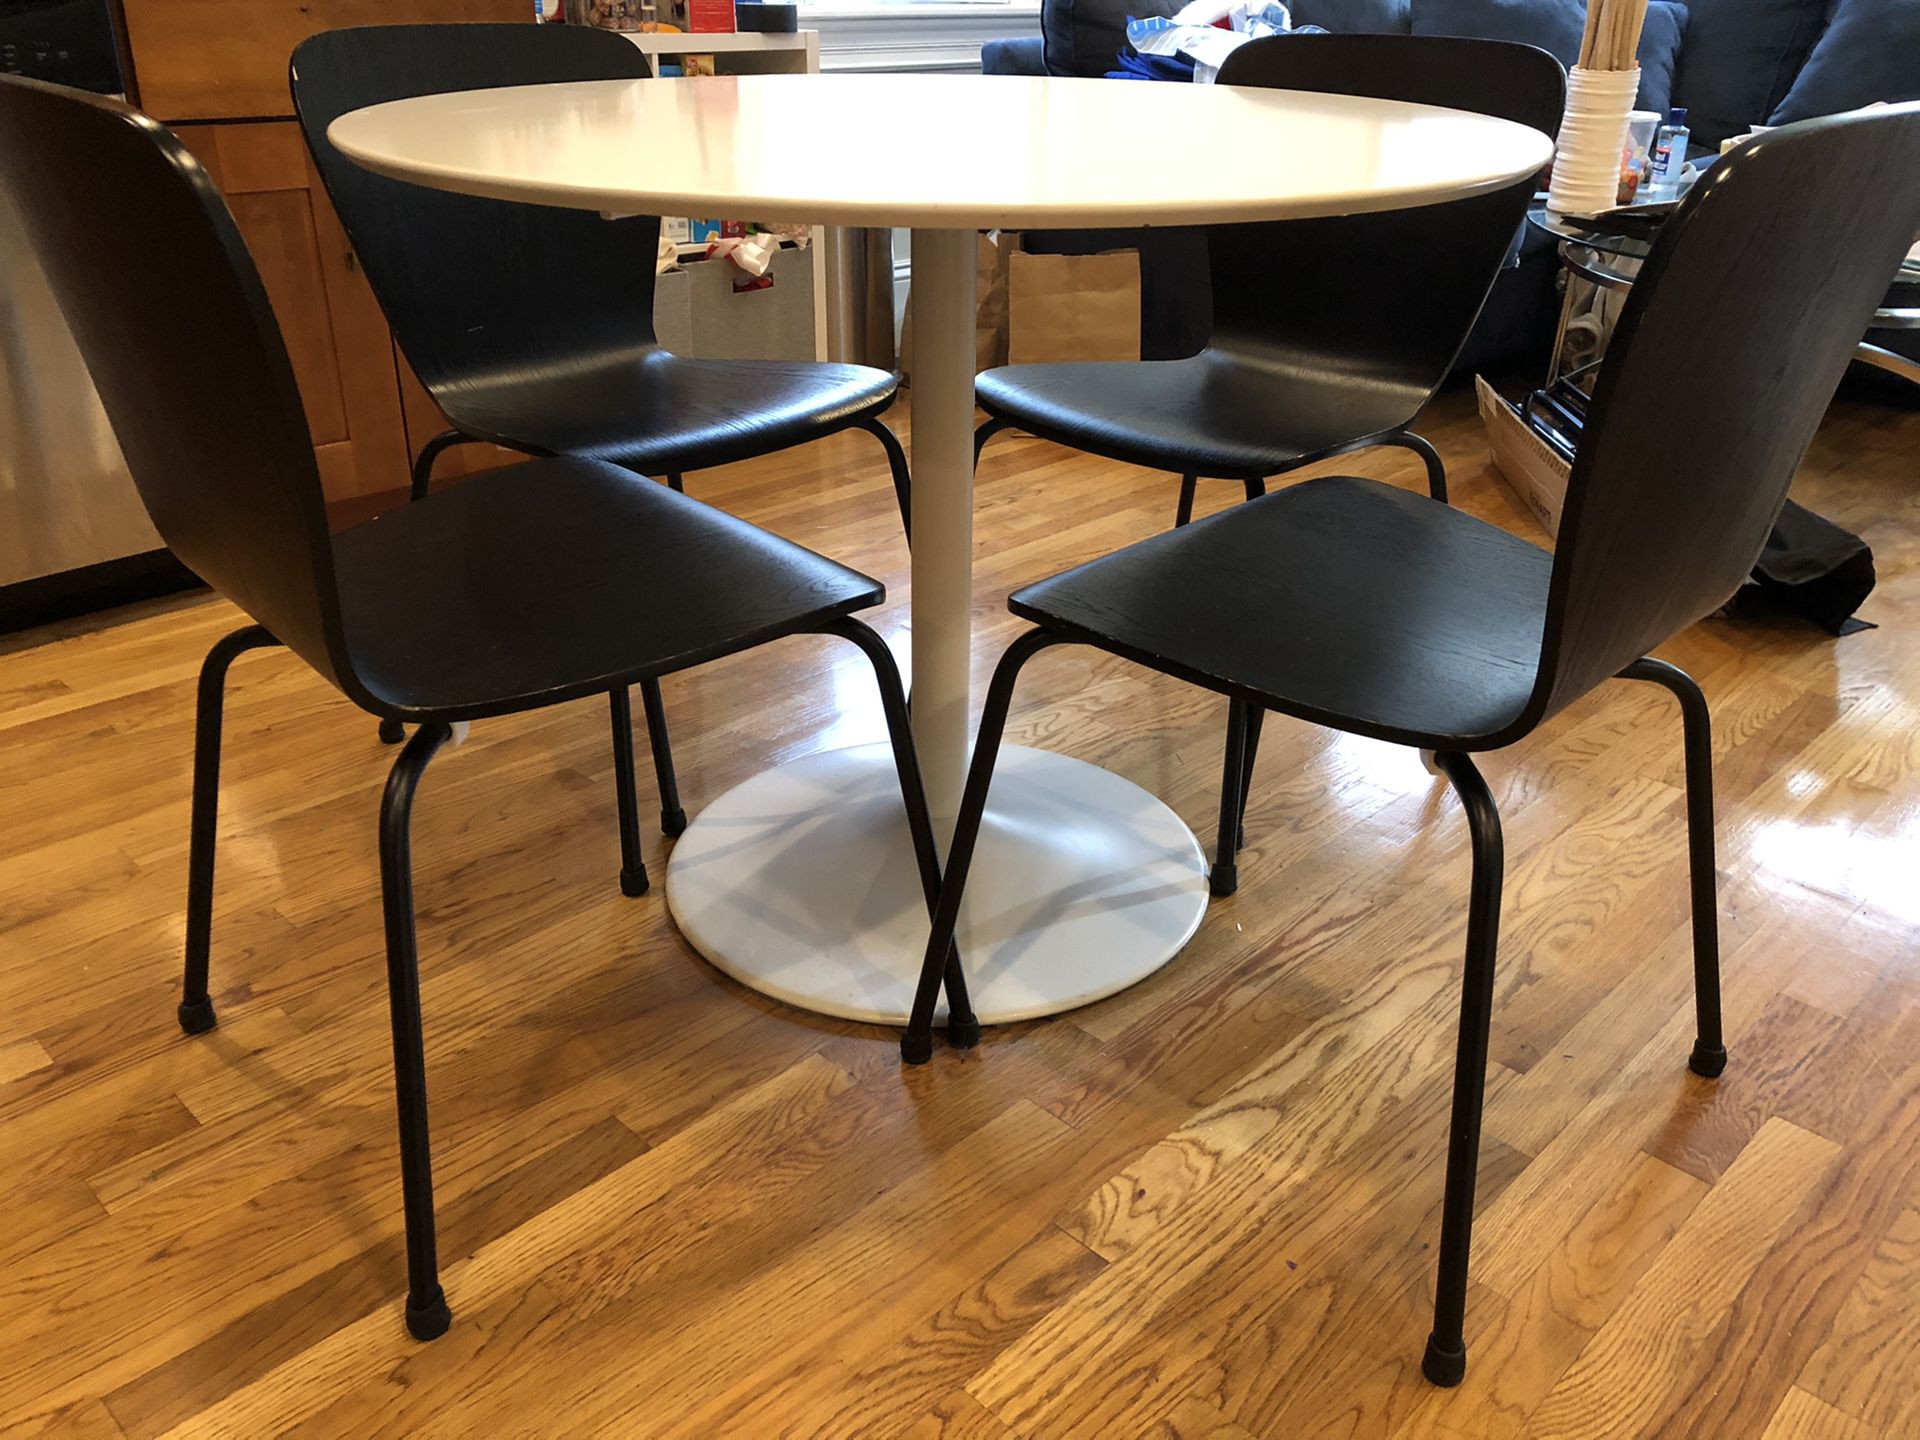 CB2 White Dining Table with Crate and Barrel Black chairs